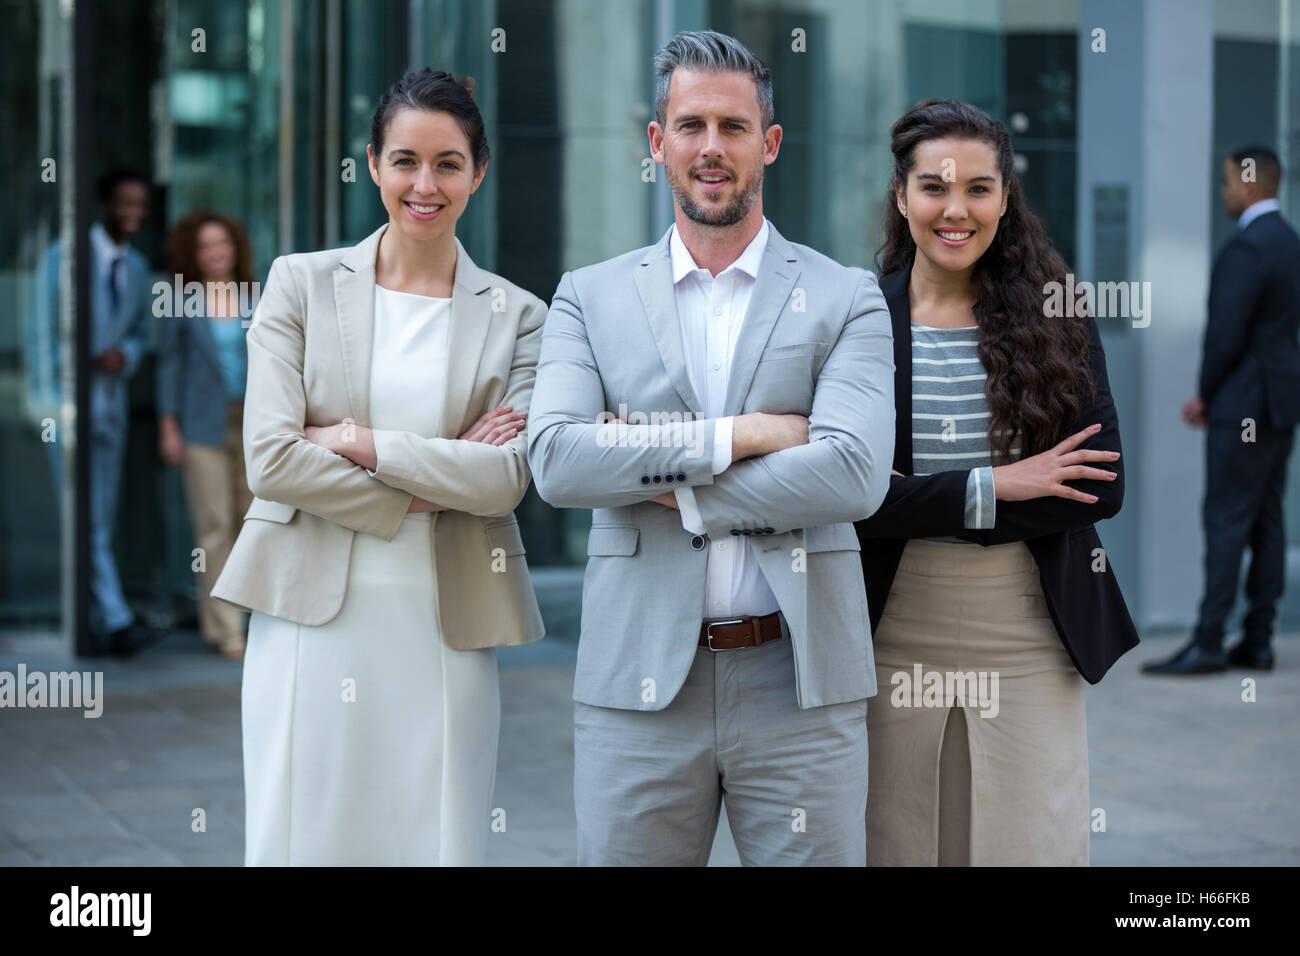 Smiling businesspeople standing with arms crossed in office building Banque D'Images